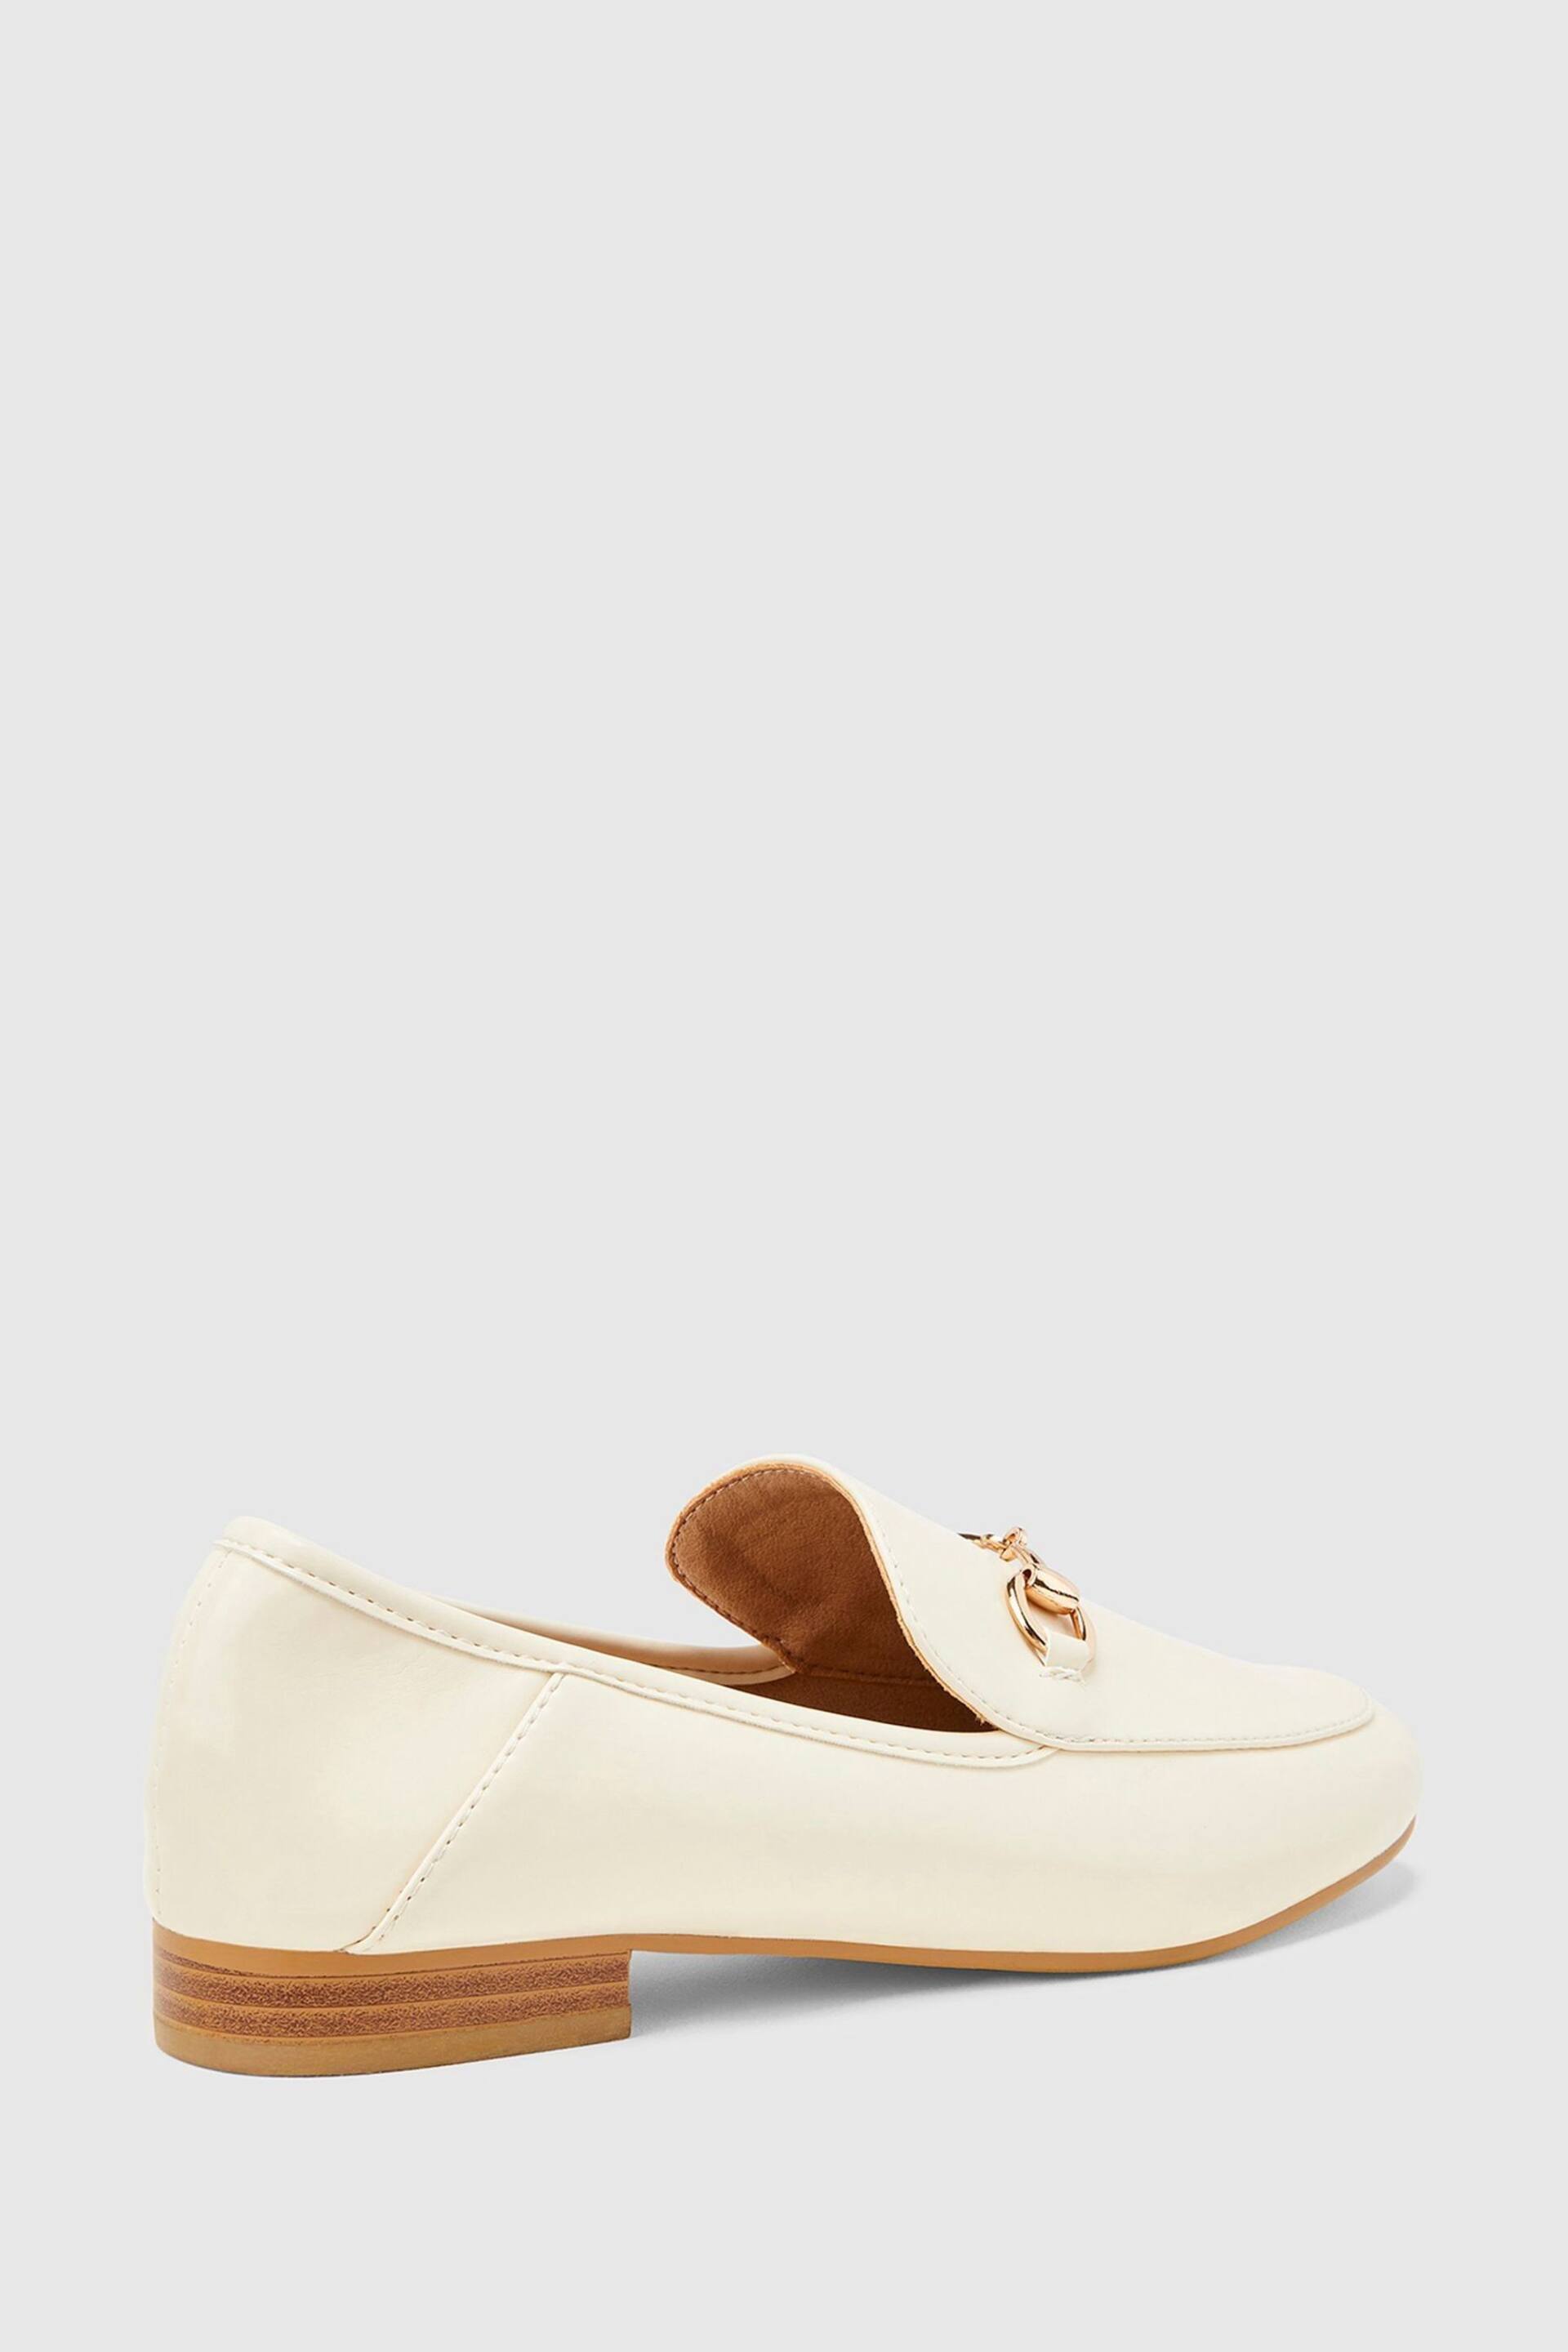 Novo Cream Early Flat Loafers - Image 3 of 3